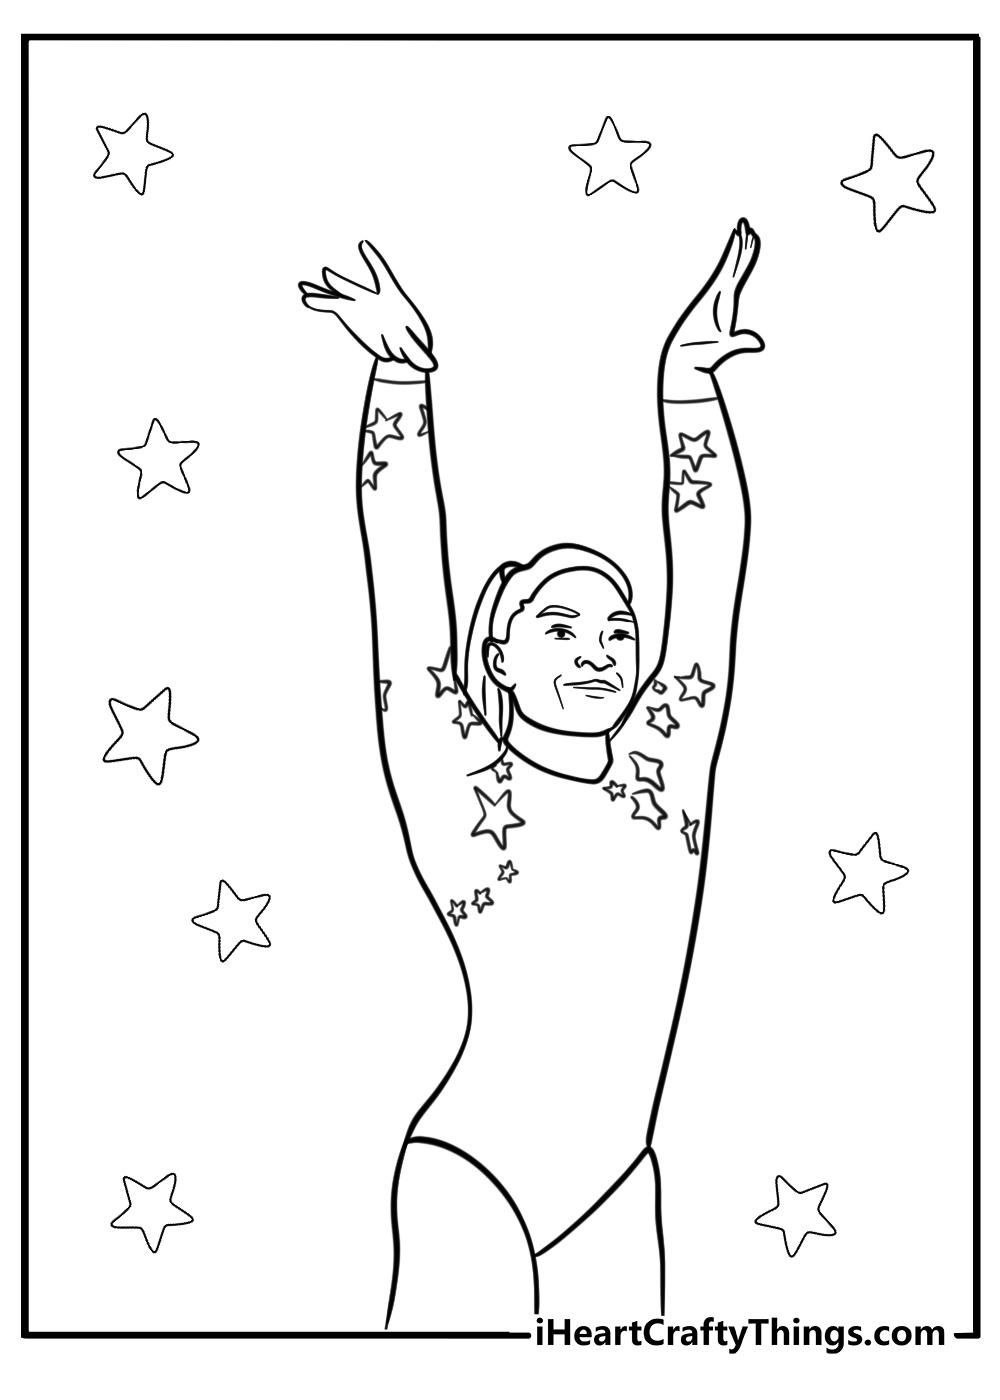 Gymnastics coloring page of simone biles in the olympics